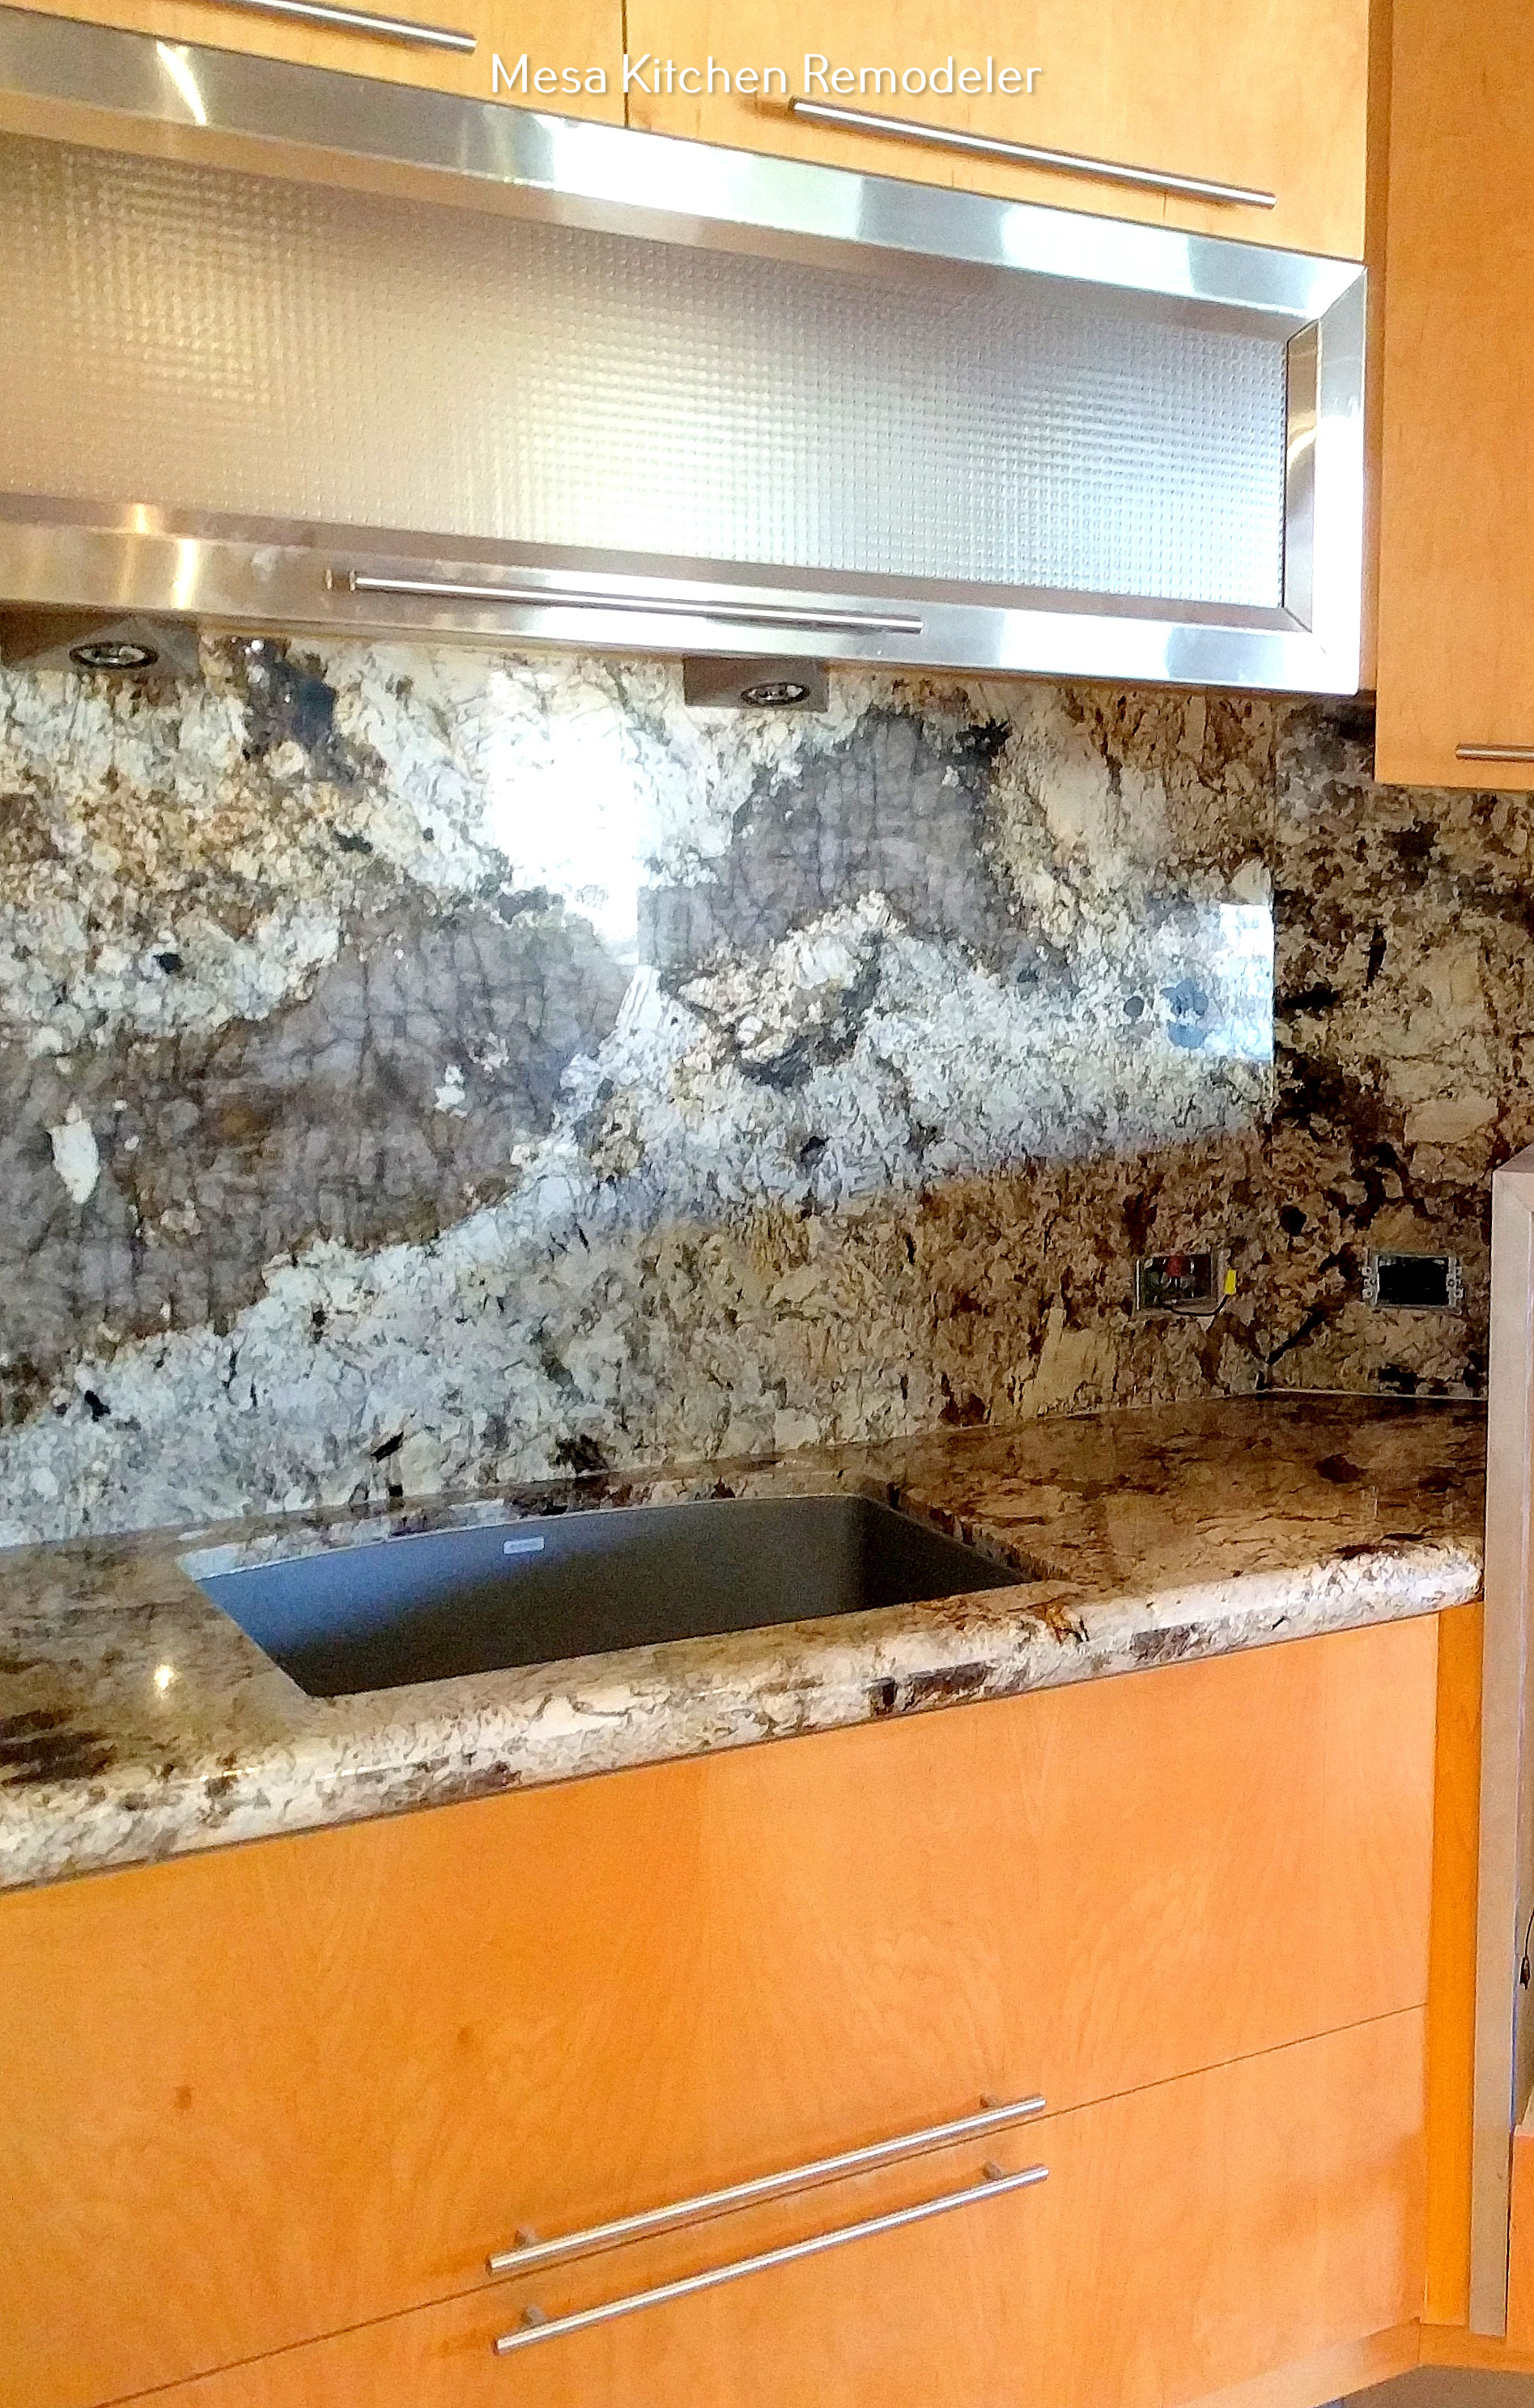 Premium Granite LLC Reviews Why Granite is The Best Choice for Kitchen Remodels, Countertops, and Islands